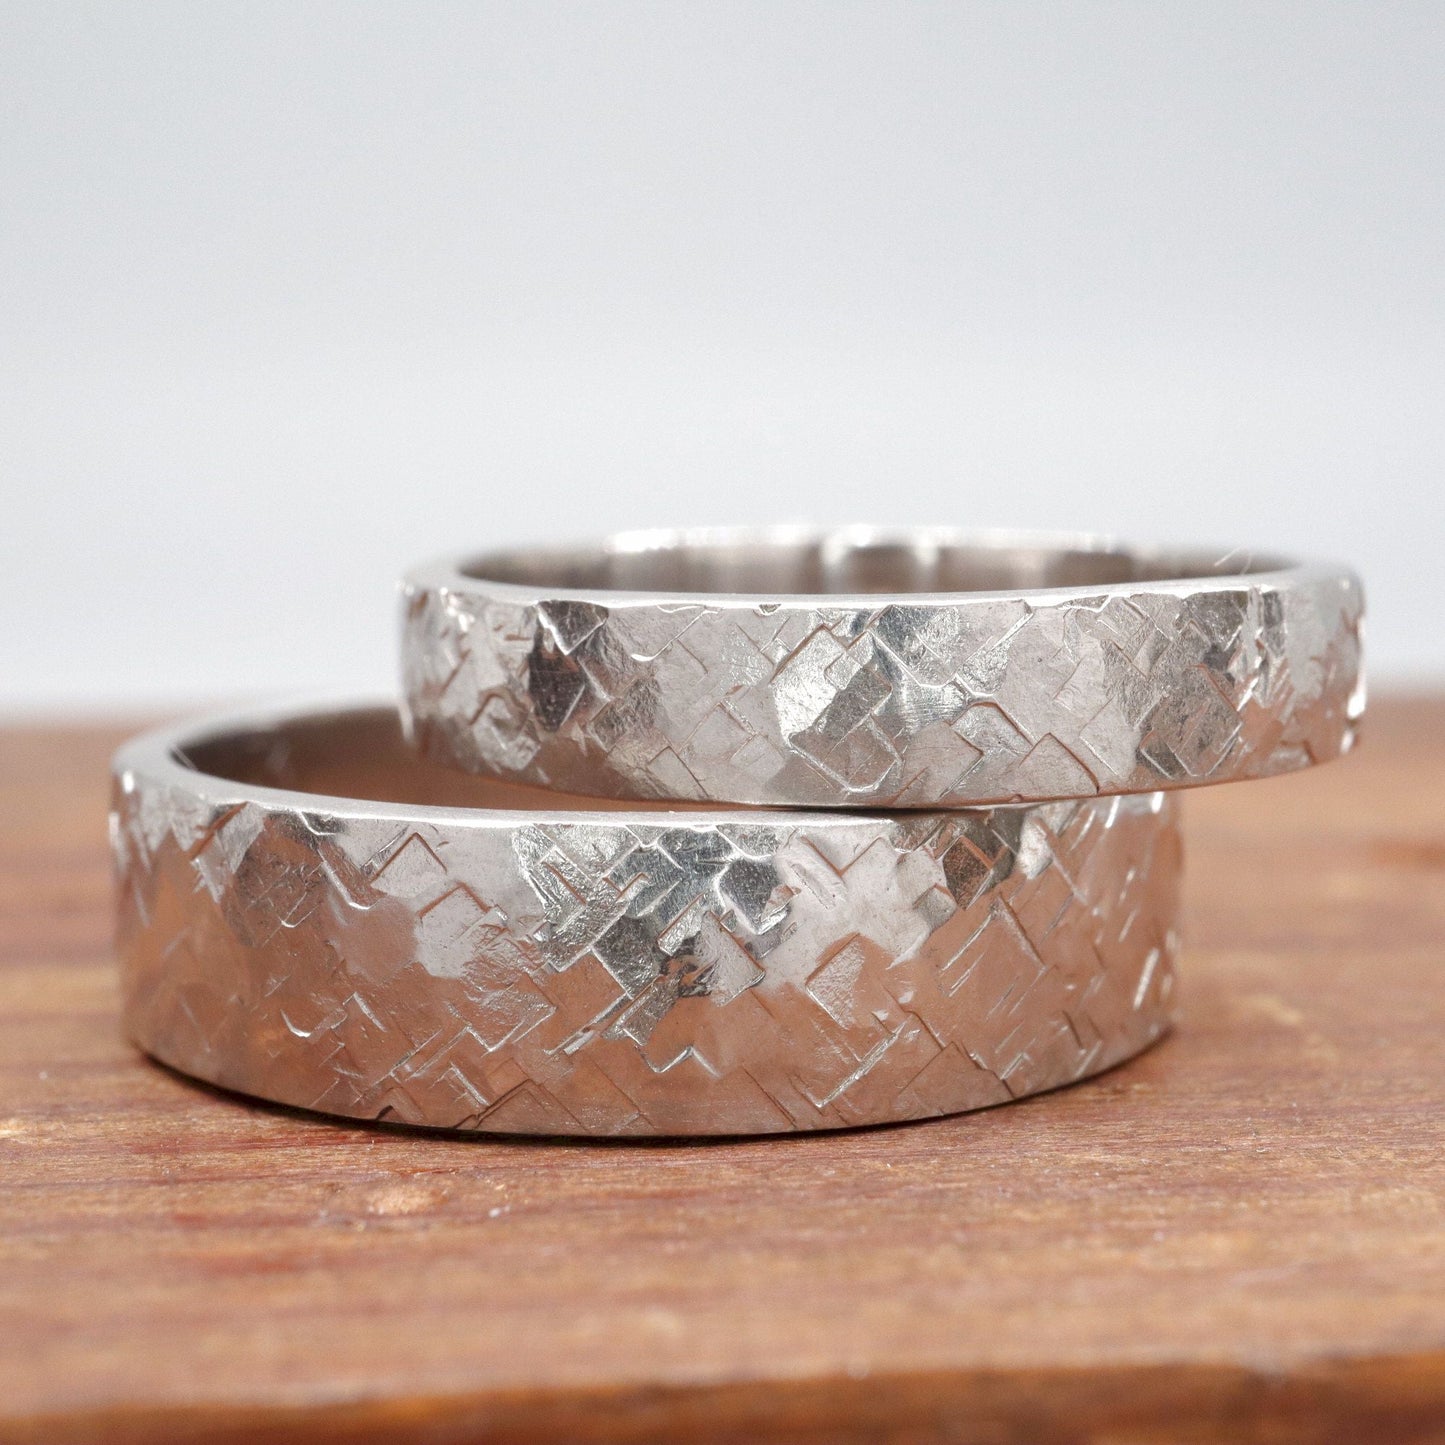 Matching Kendal design rustic hammered silver wedding ring set - flat textured 4mm and 6mm men and womens rings.